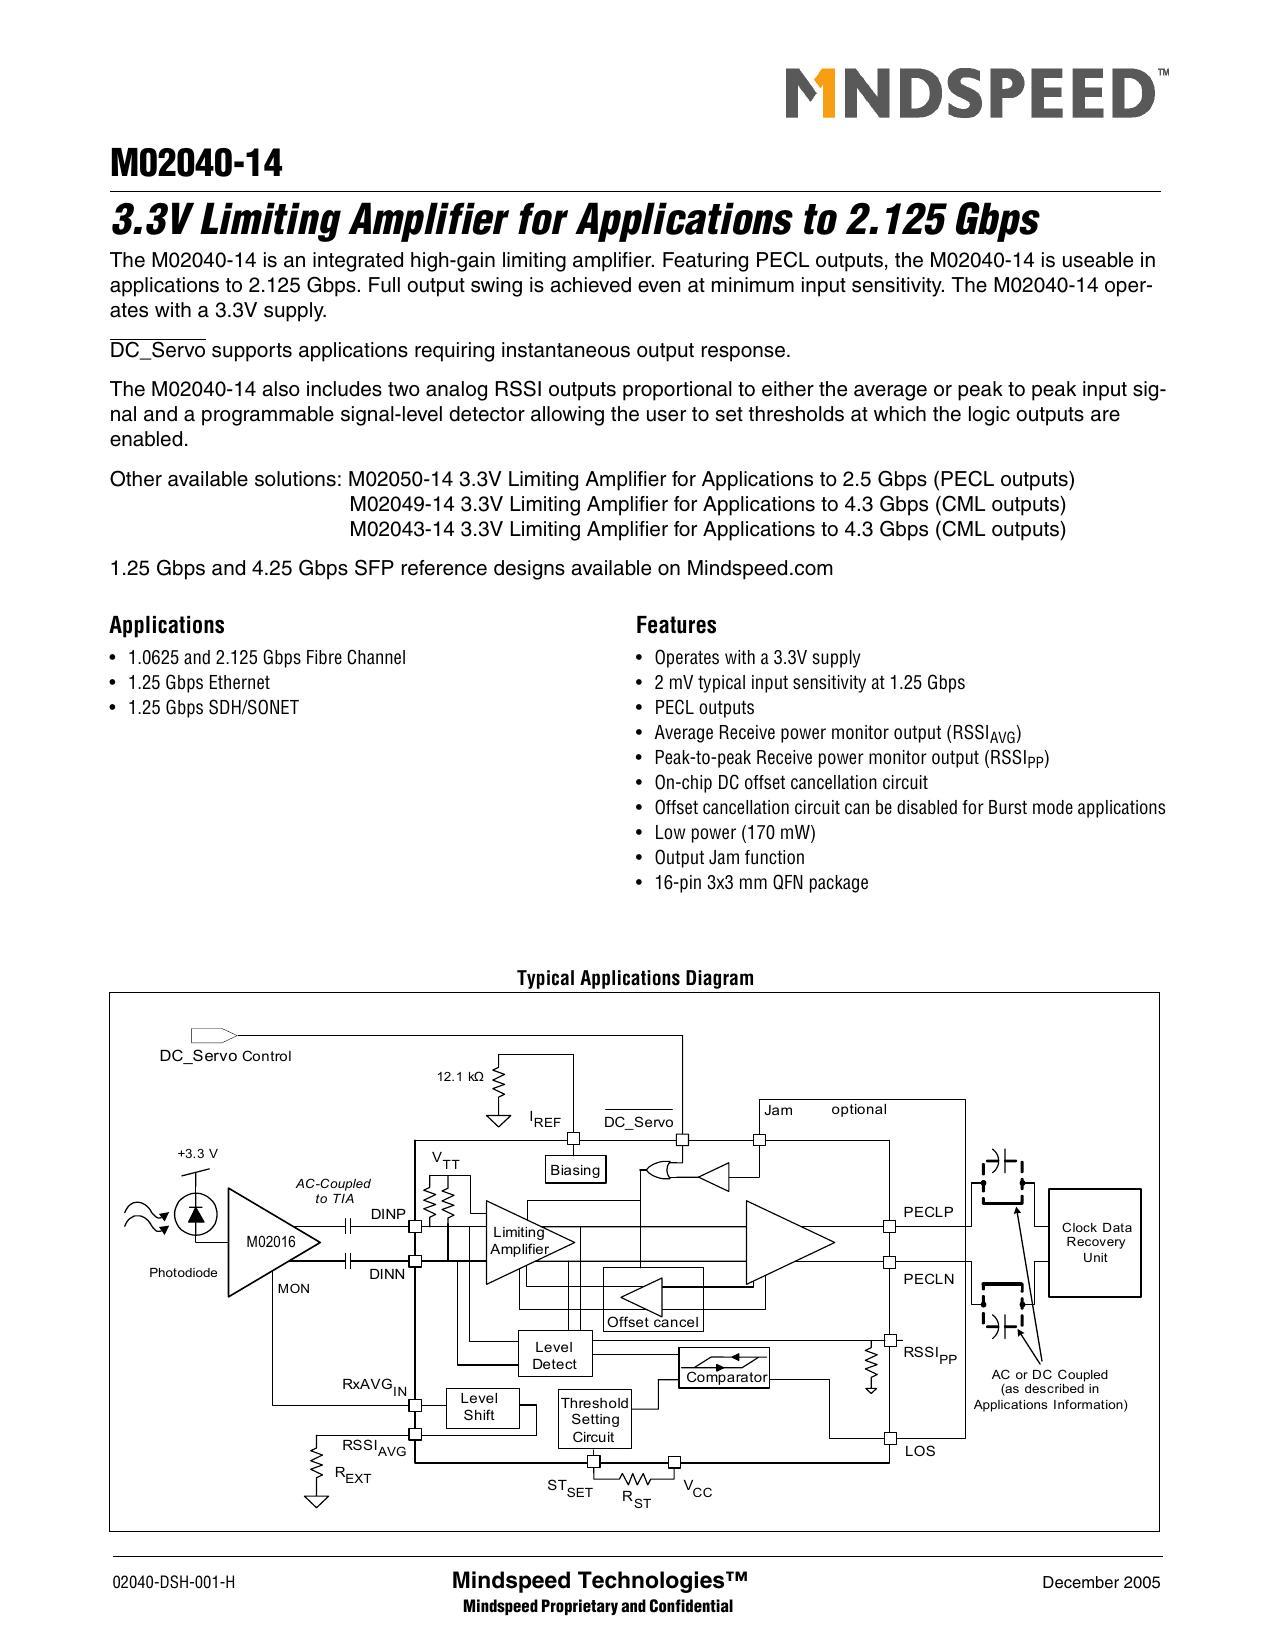 mo2040-14-33v-limiting-amplifier-for-applications-to-2125-gbps-datasheet.pdf